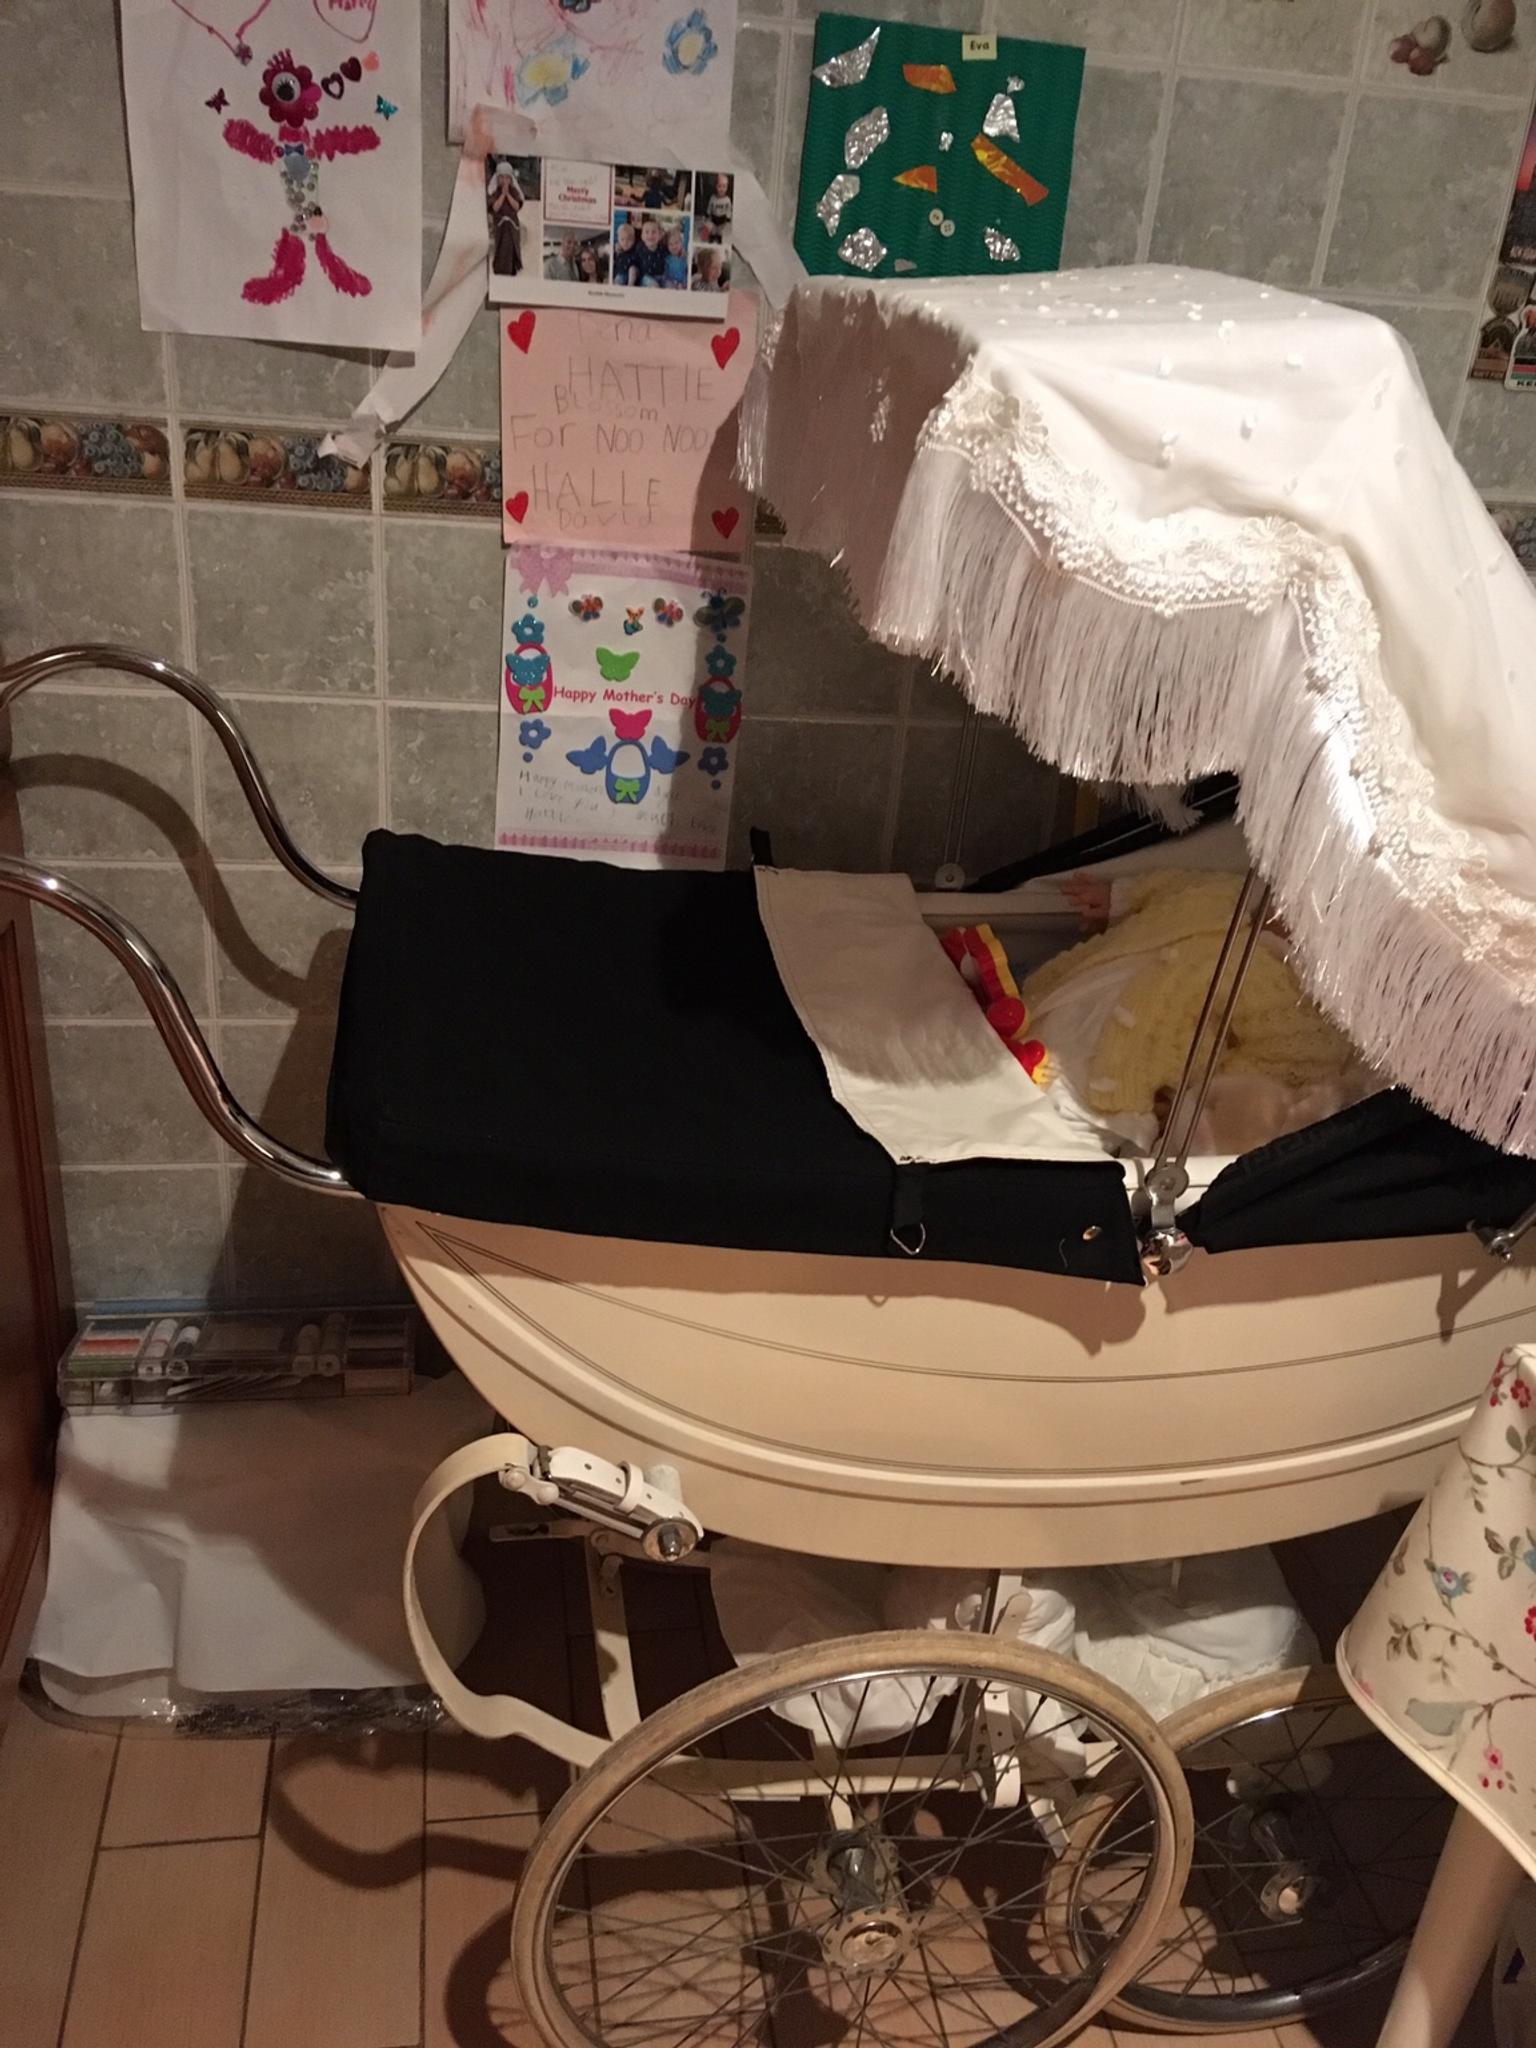 osnath prams for sale